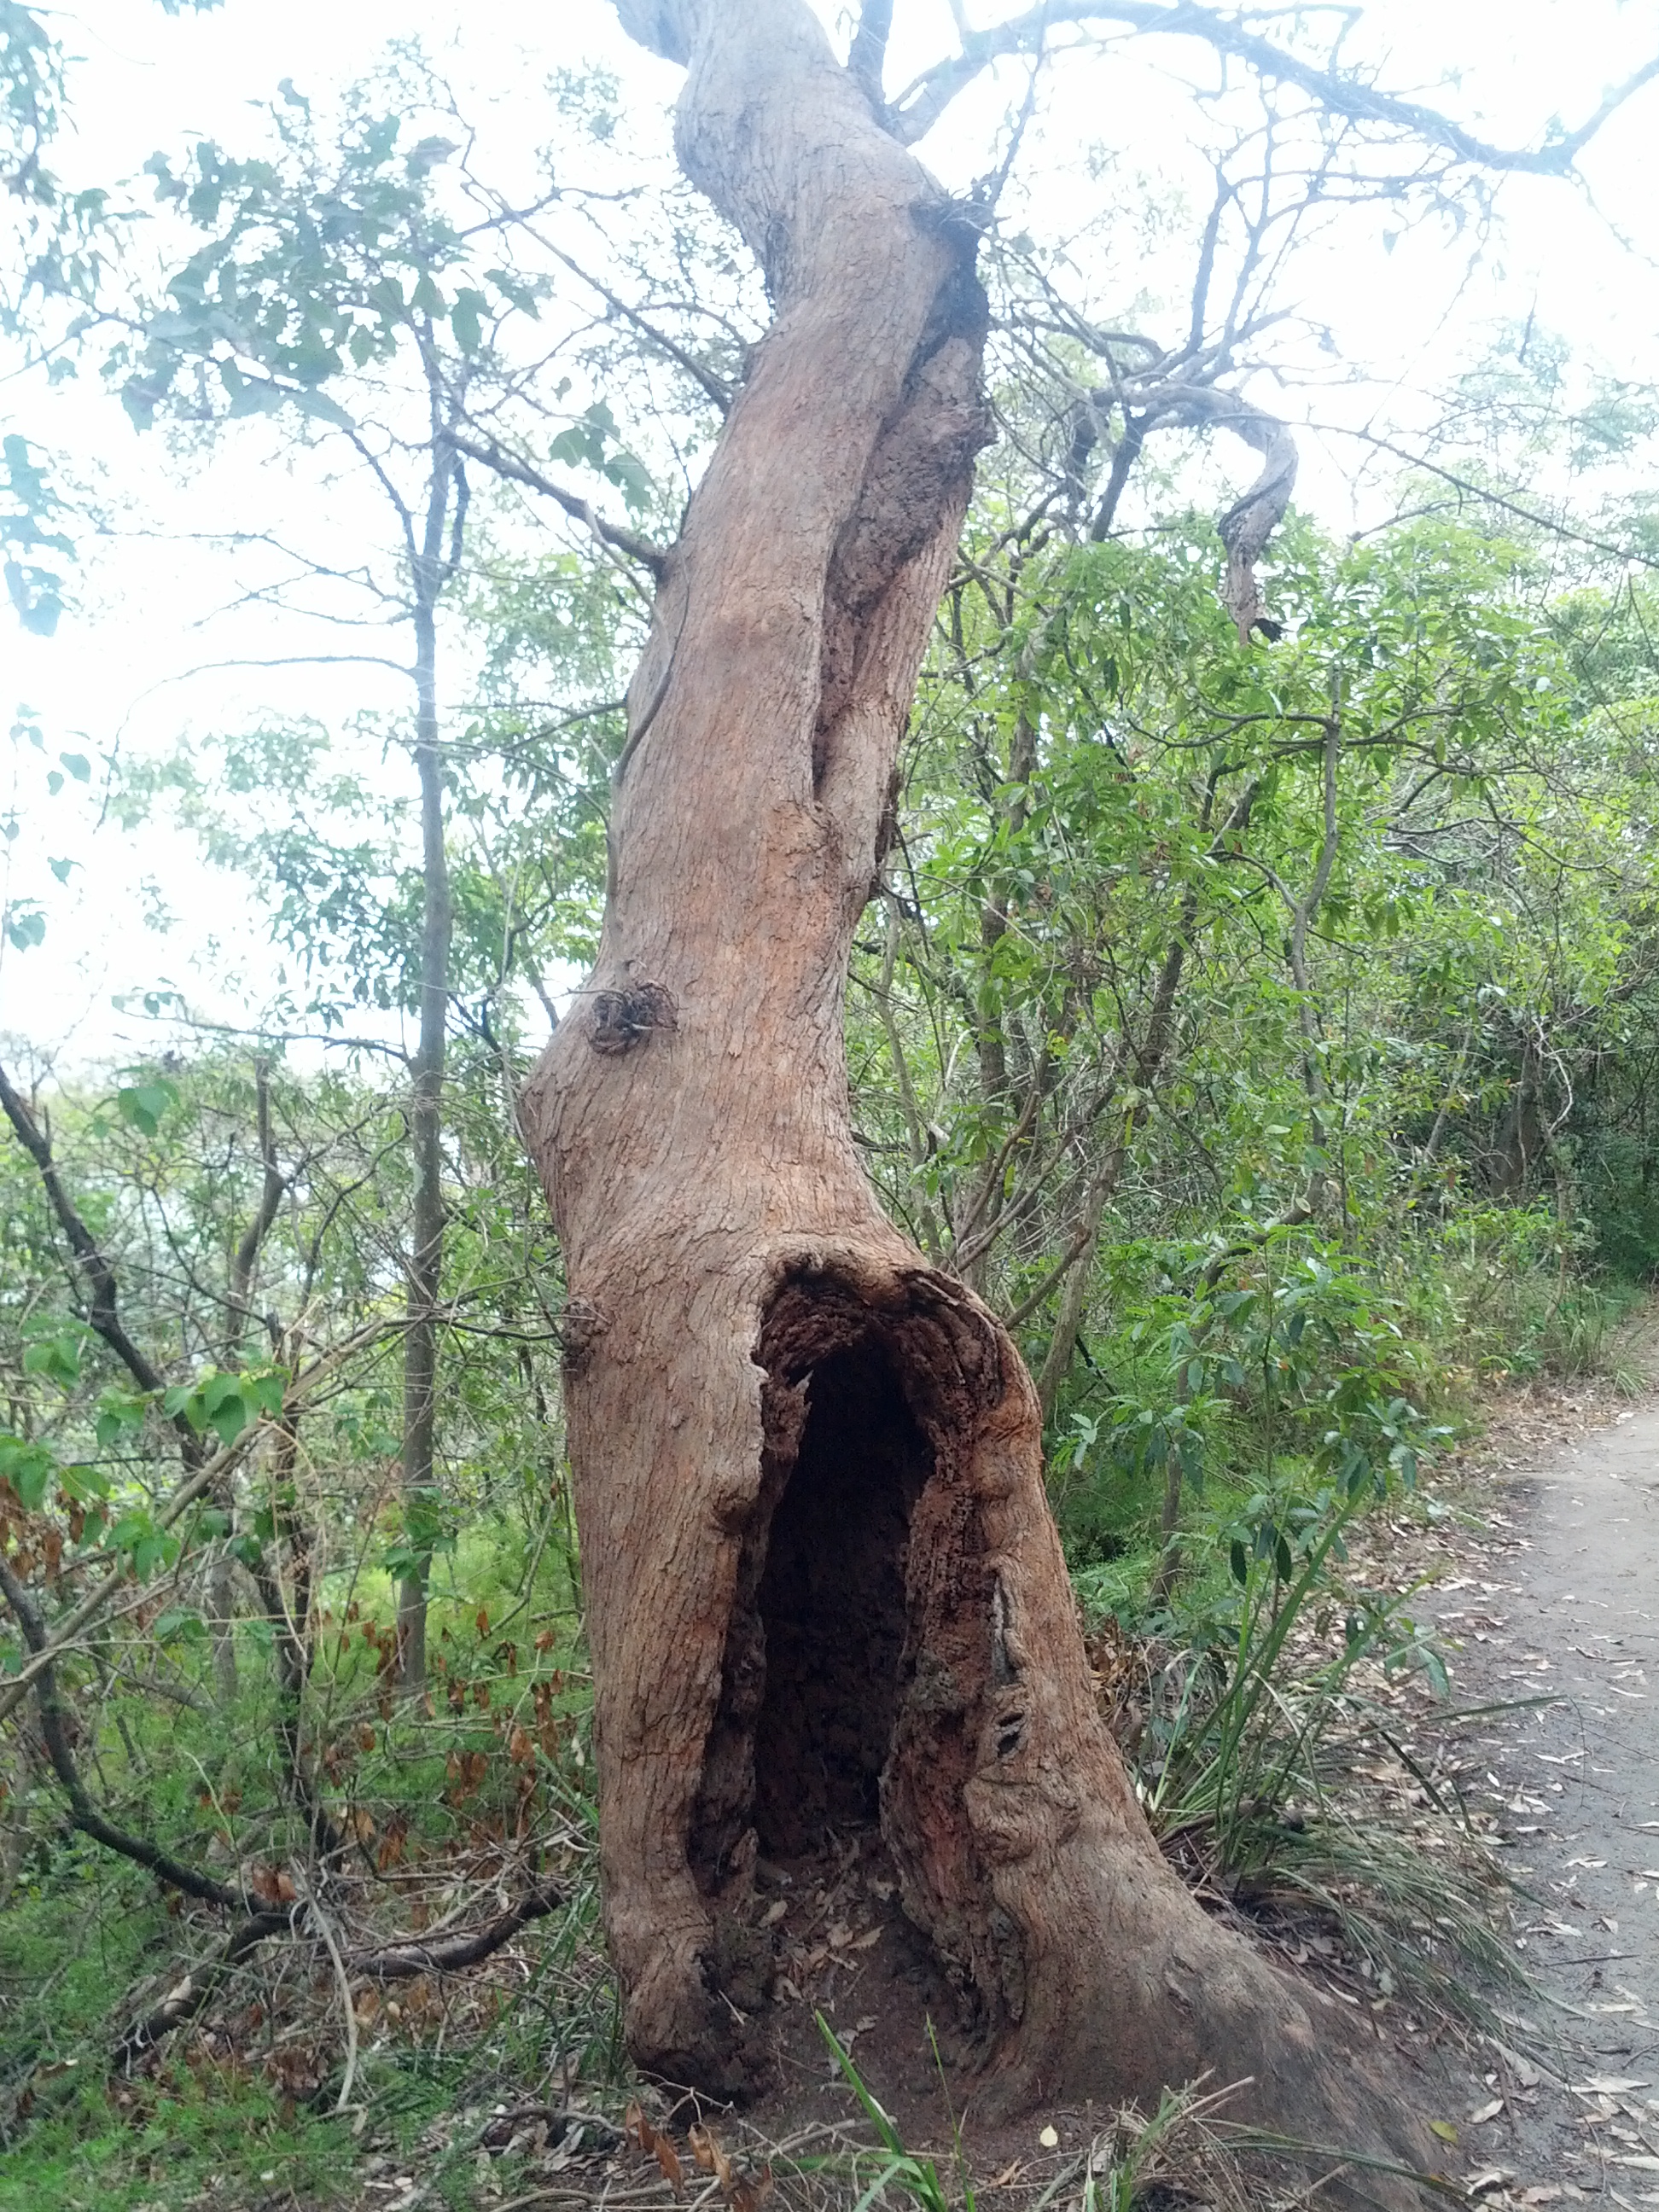 A number of trees along the route with this weird base hollowing.